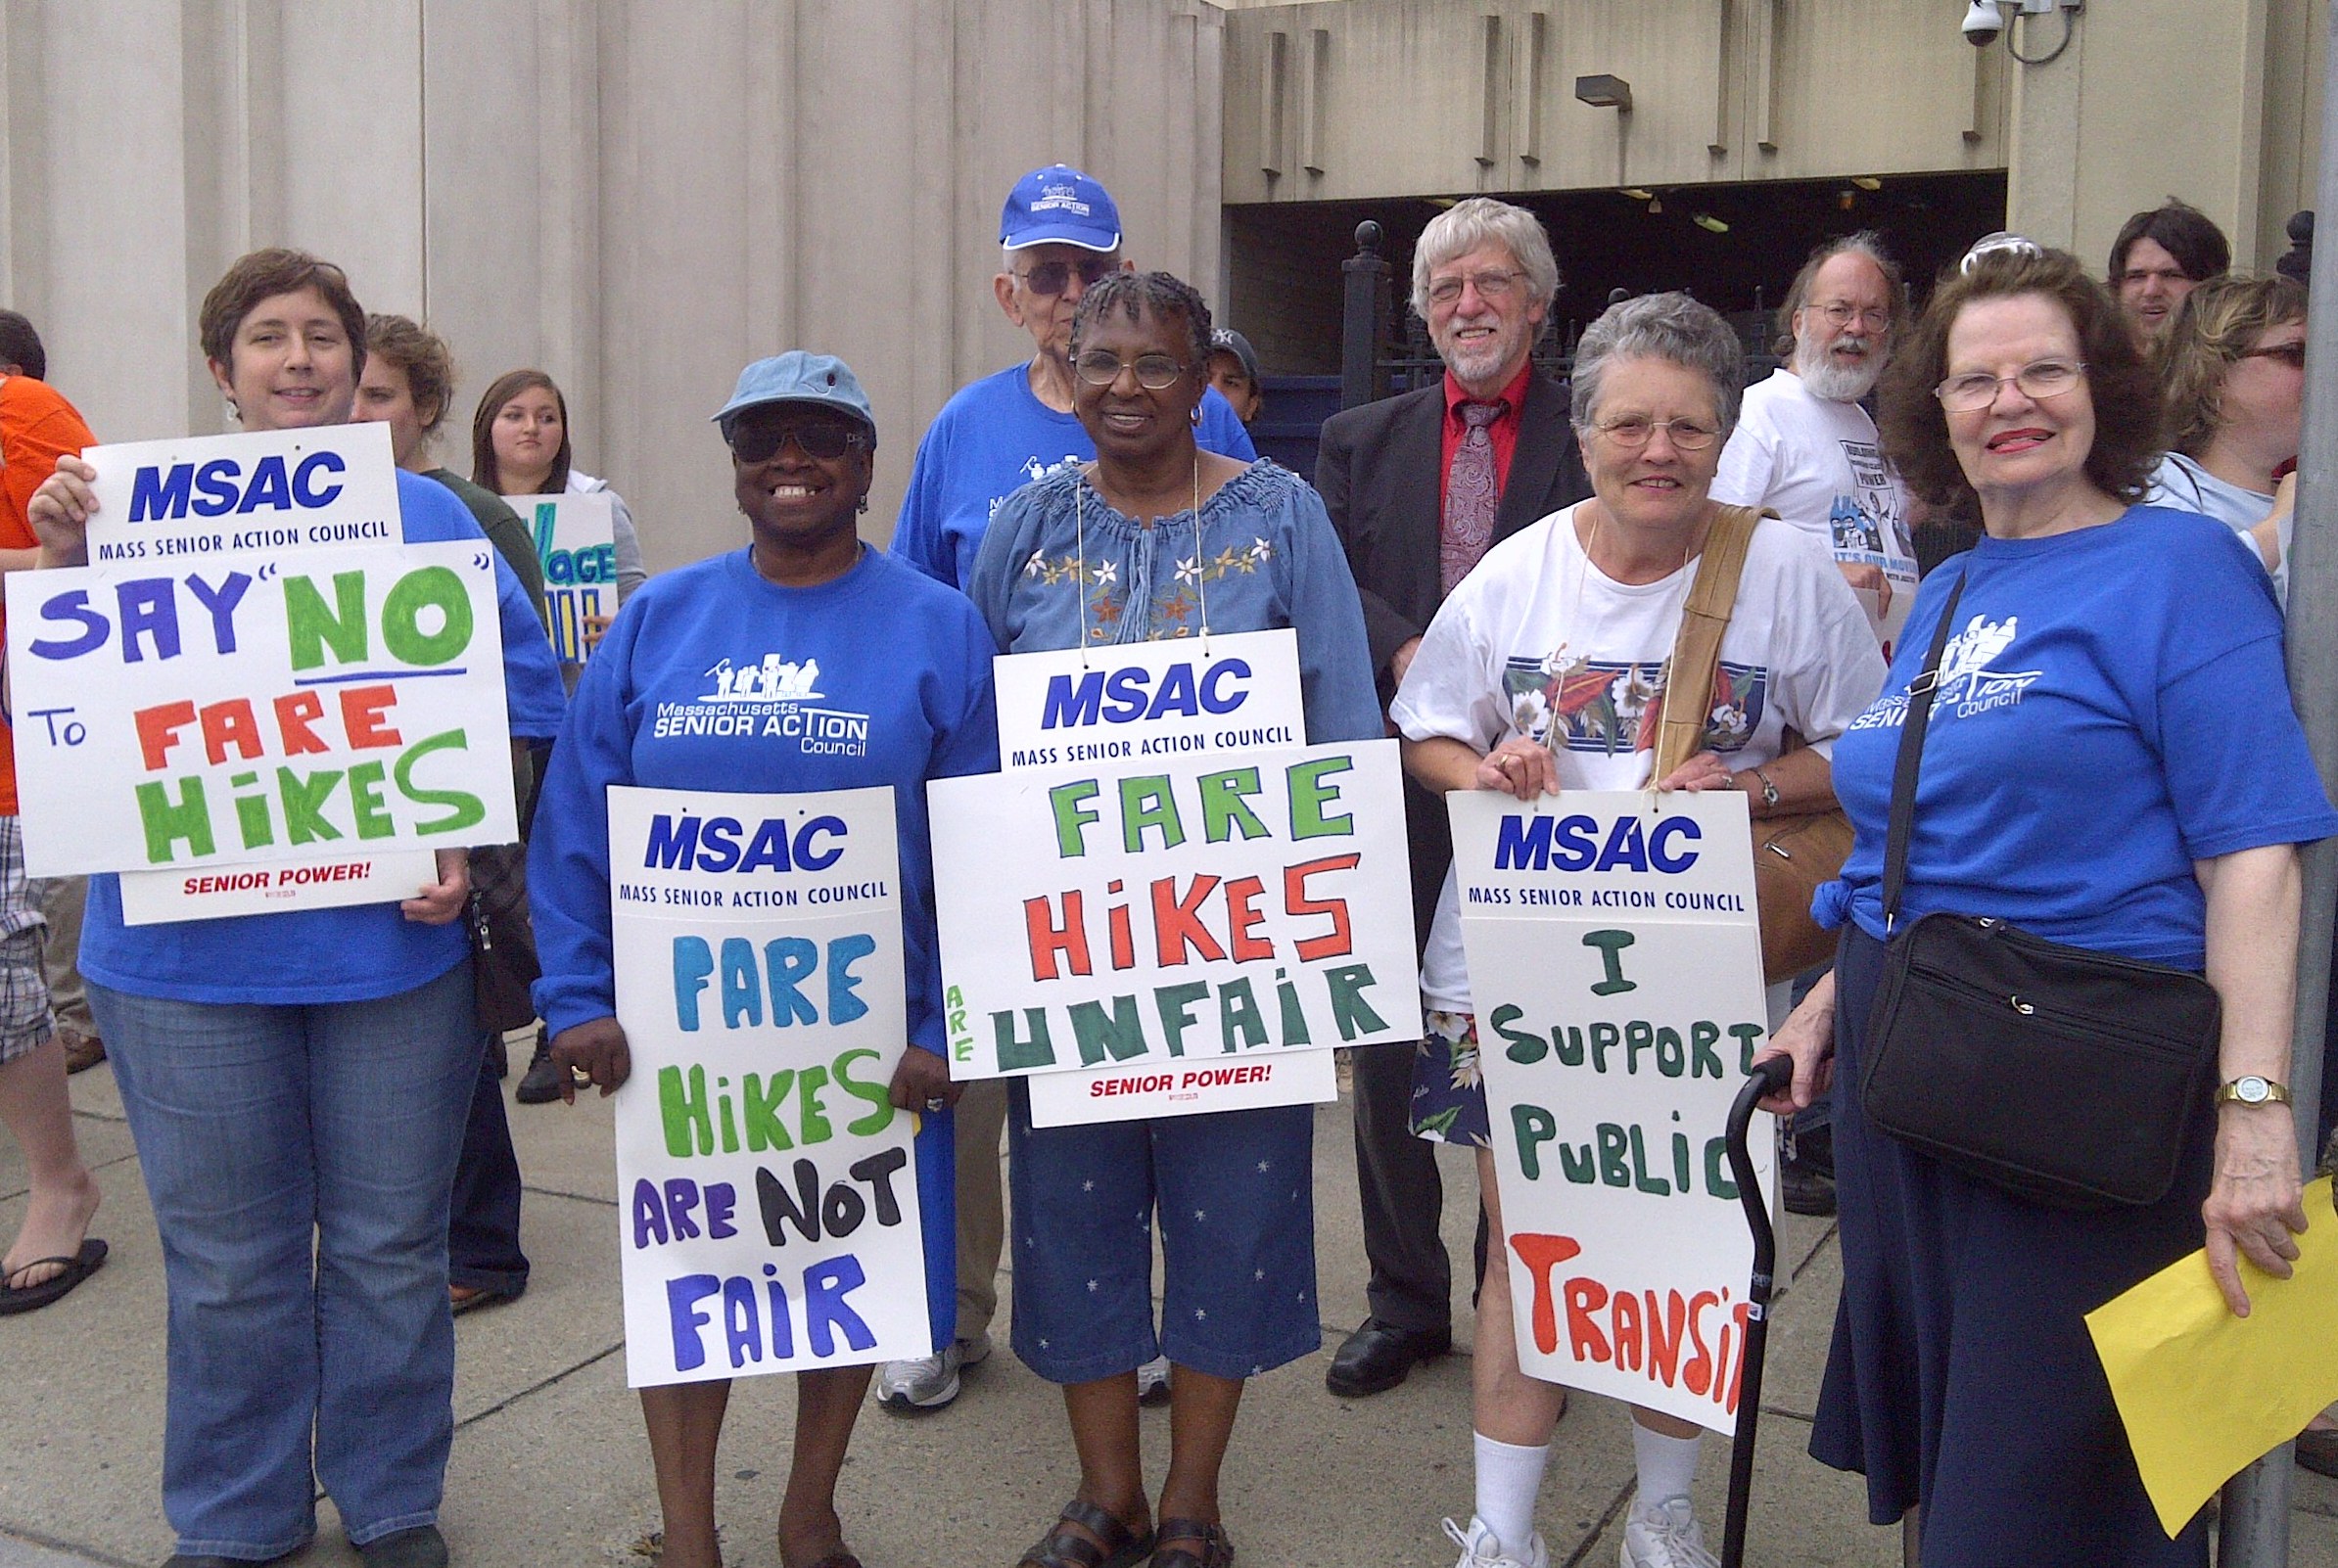 MSAC members holding signs reading say no to fare hikes